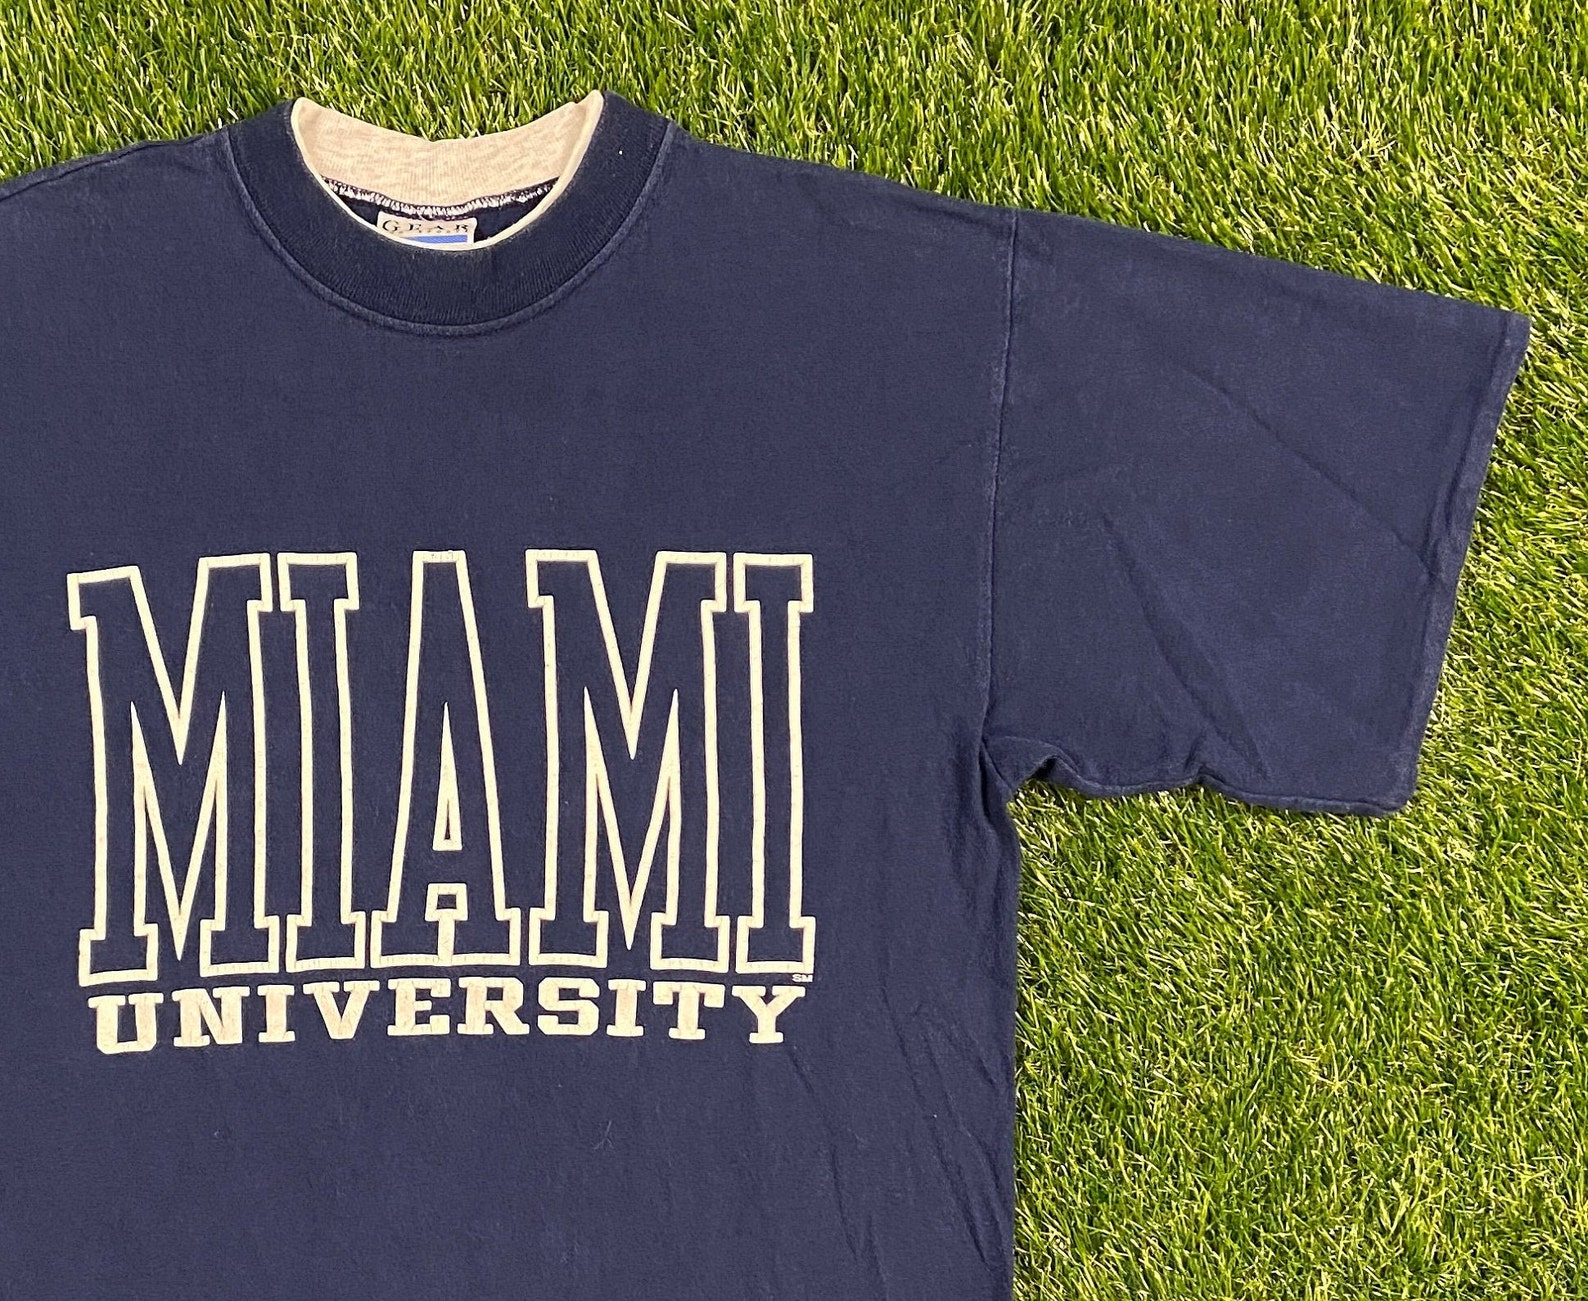 Vintage Miami University T Shirt Tee Gear for Sports Made USA - Etsy ...